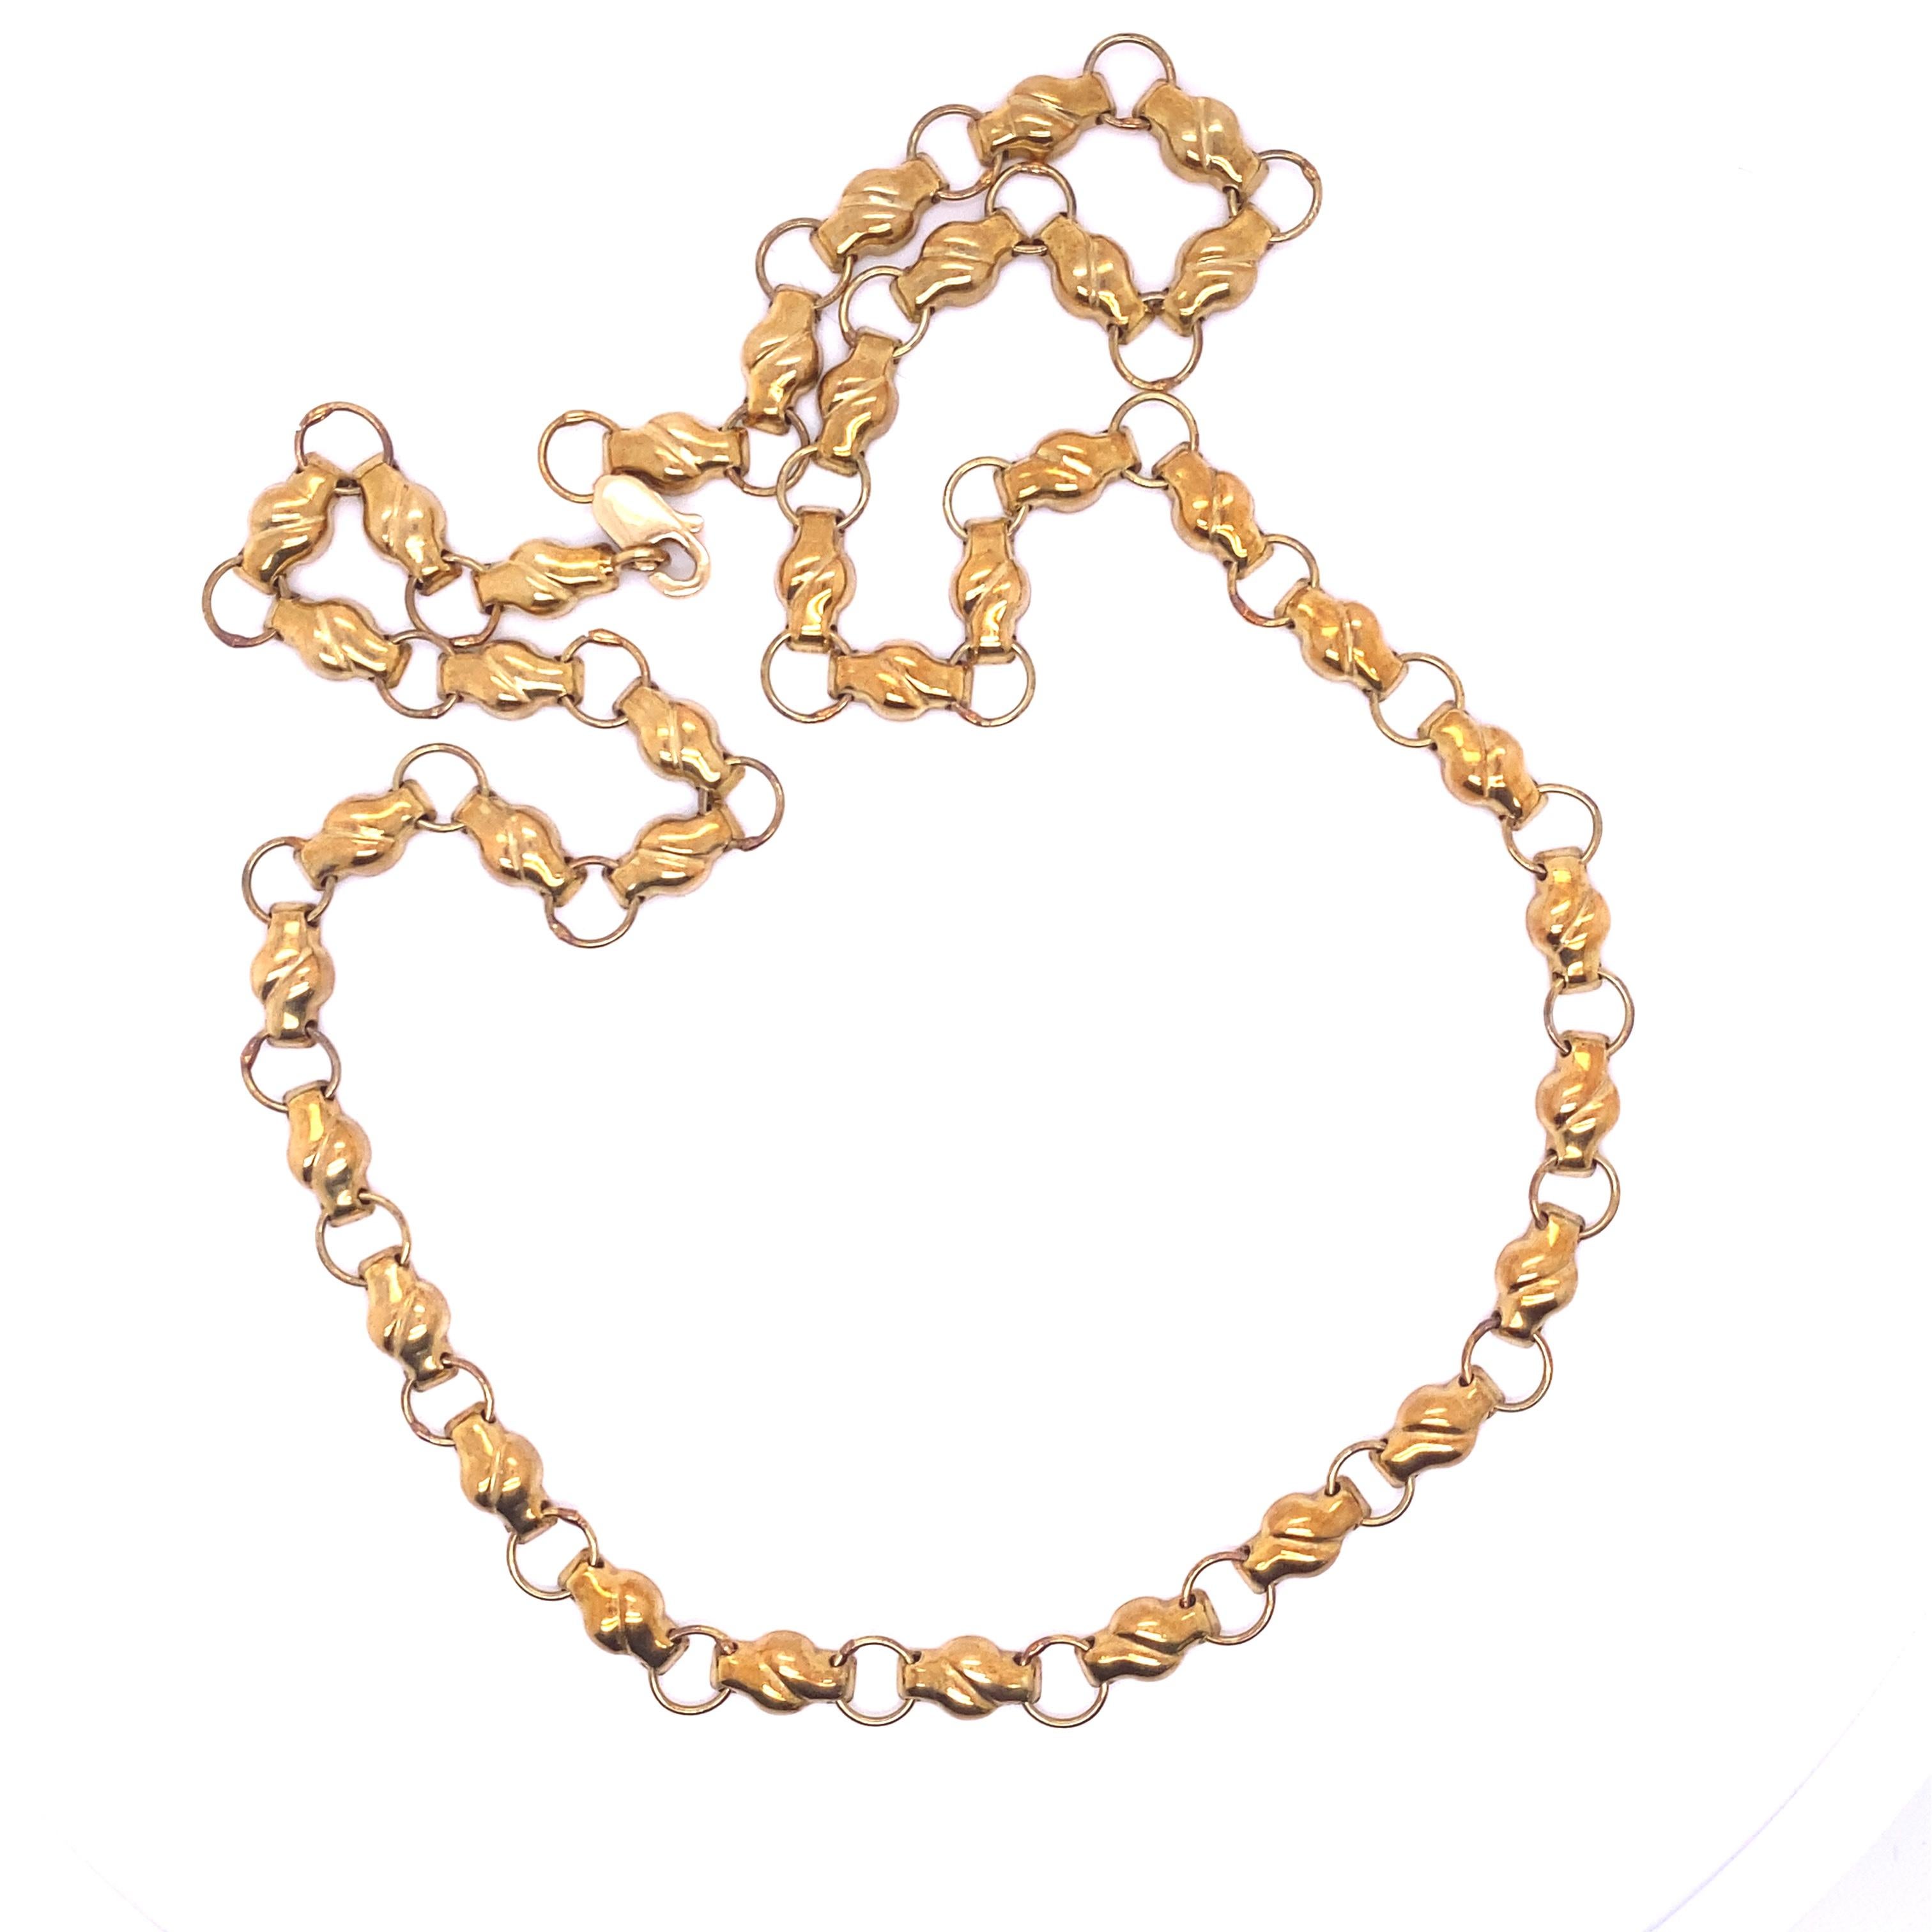 Vintage, Antique, Solid 14kt Yellow Gold Chain Link Necklace 1